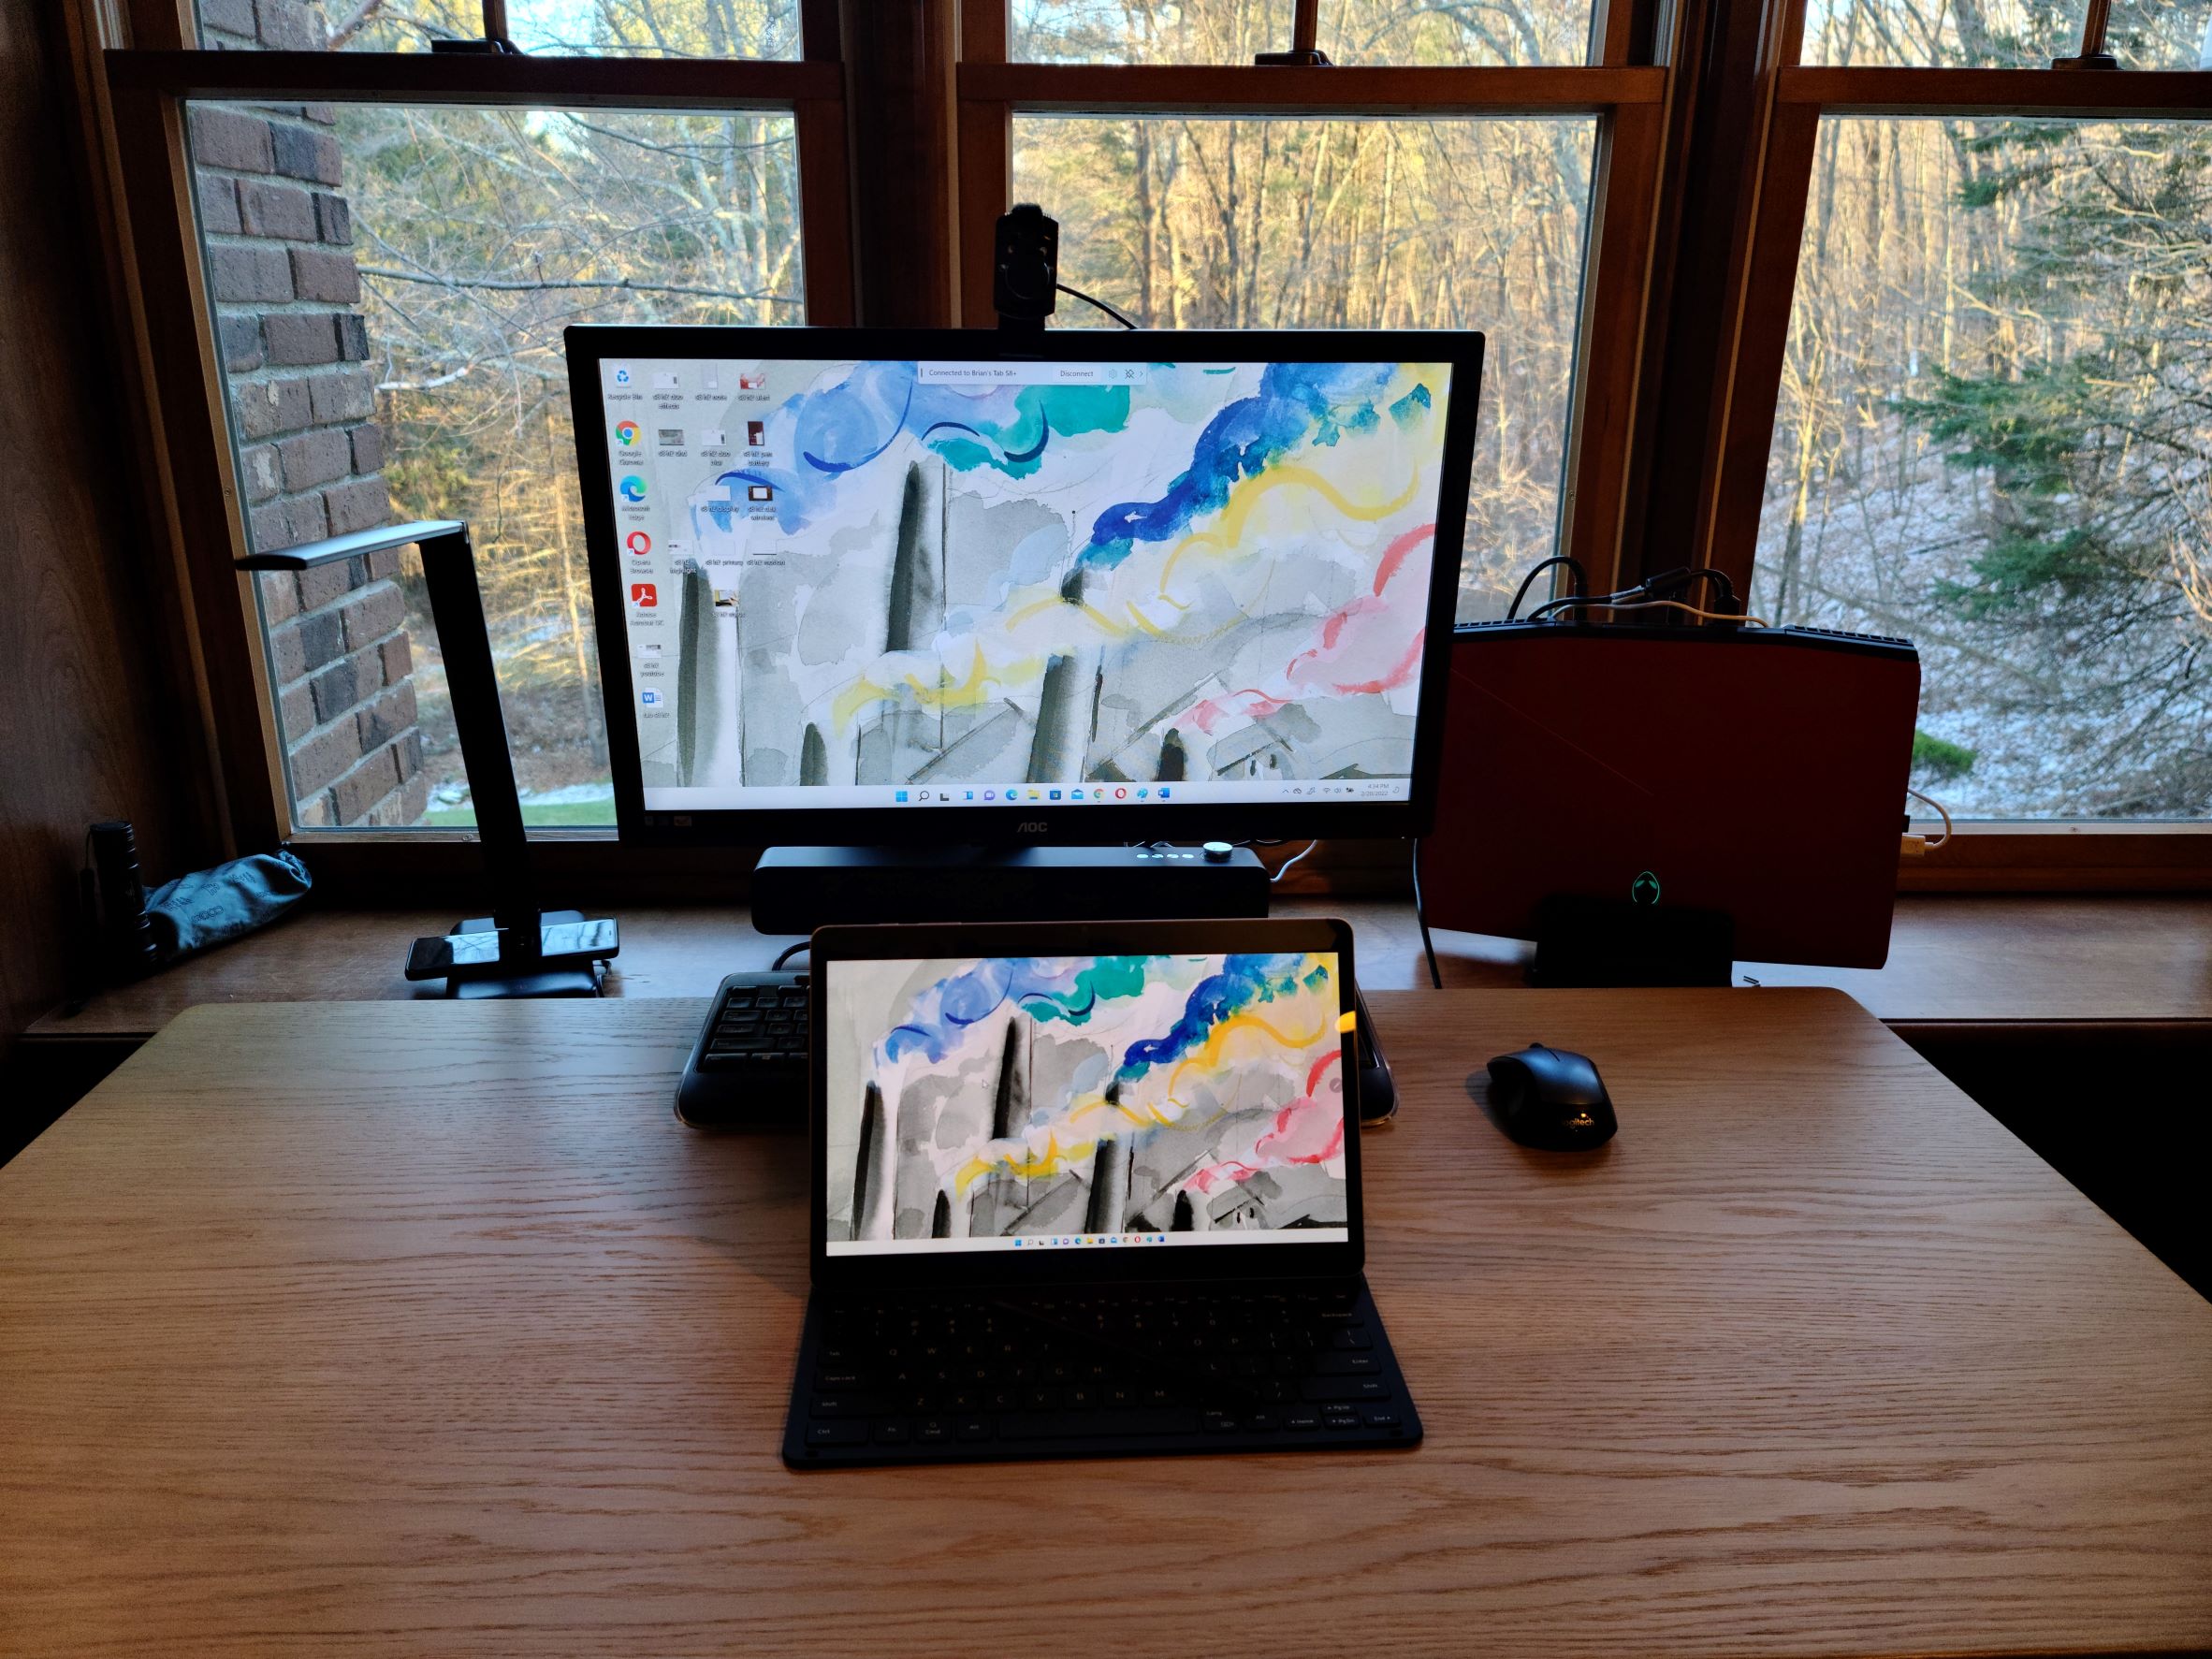 Samsung Galaxy Tab S8 Plus on a desk showing PC monitor being mirrored